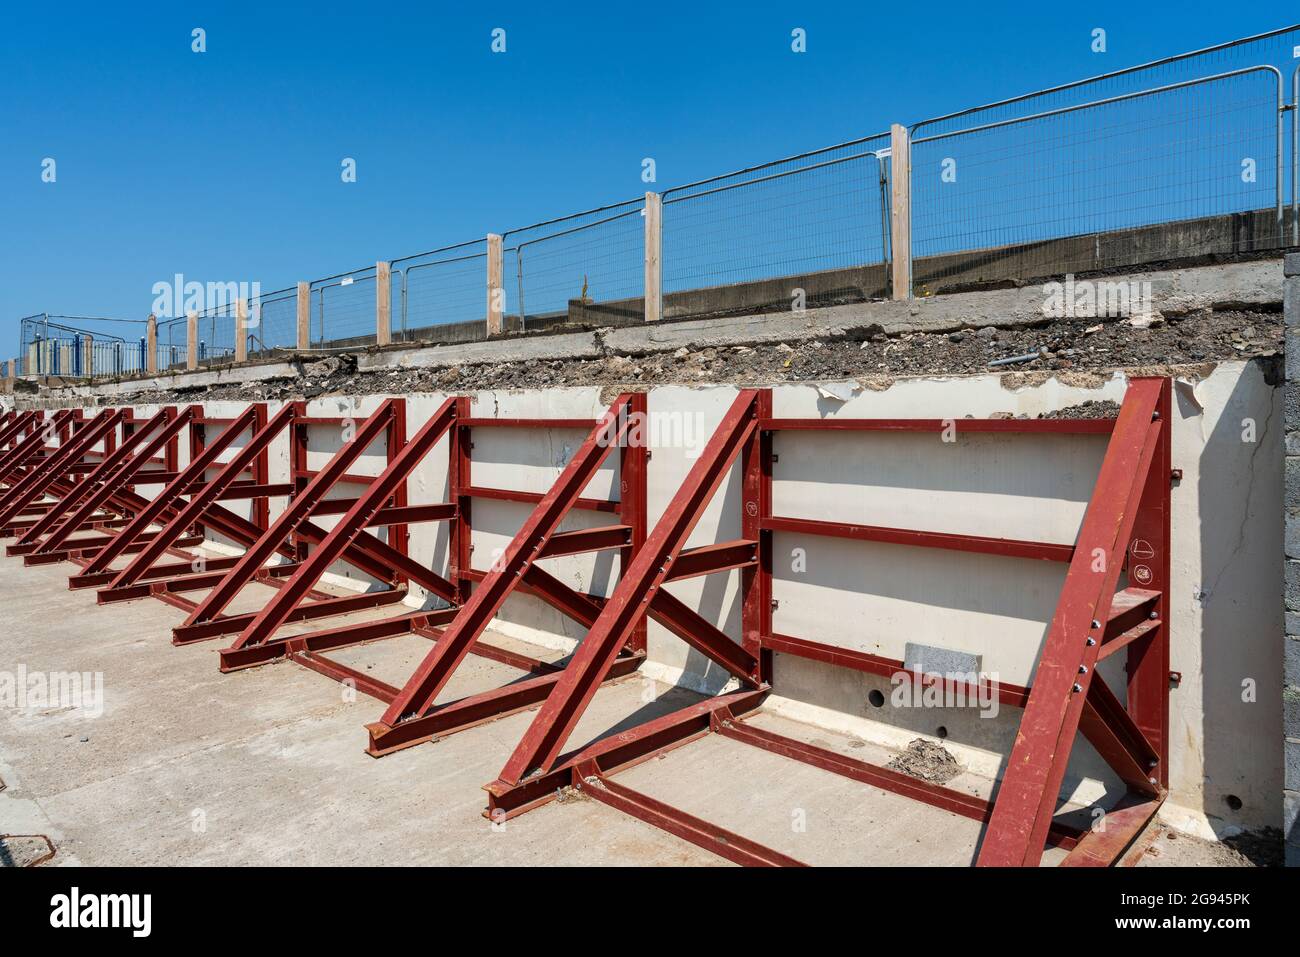 Landscape view of renovation work on the concrete sea wall with steel supports, Sutton-on-Sea, Lincolnshire, UK, June Stock Photo